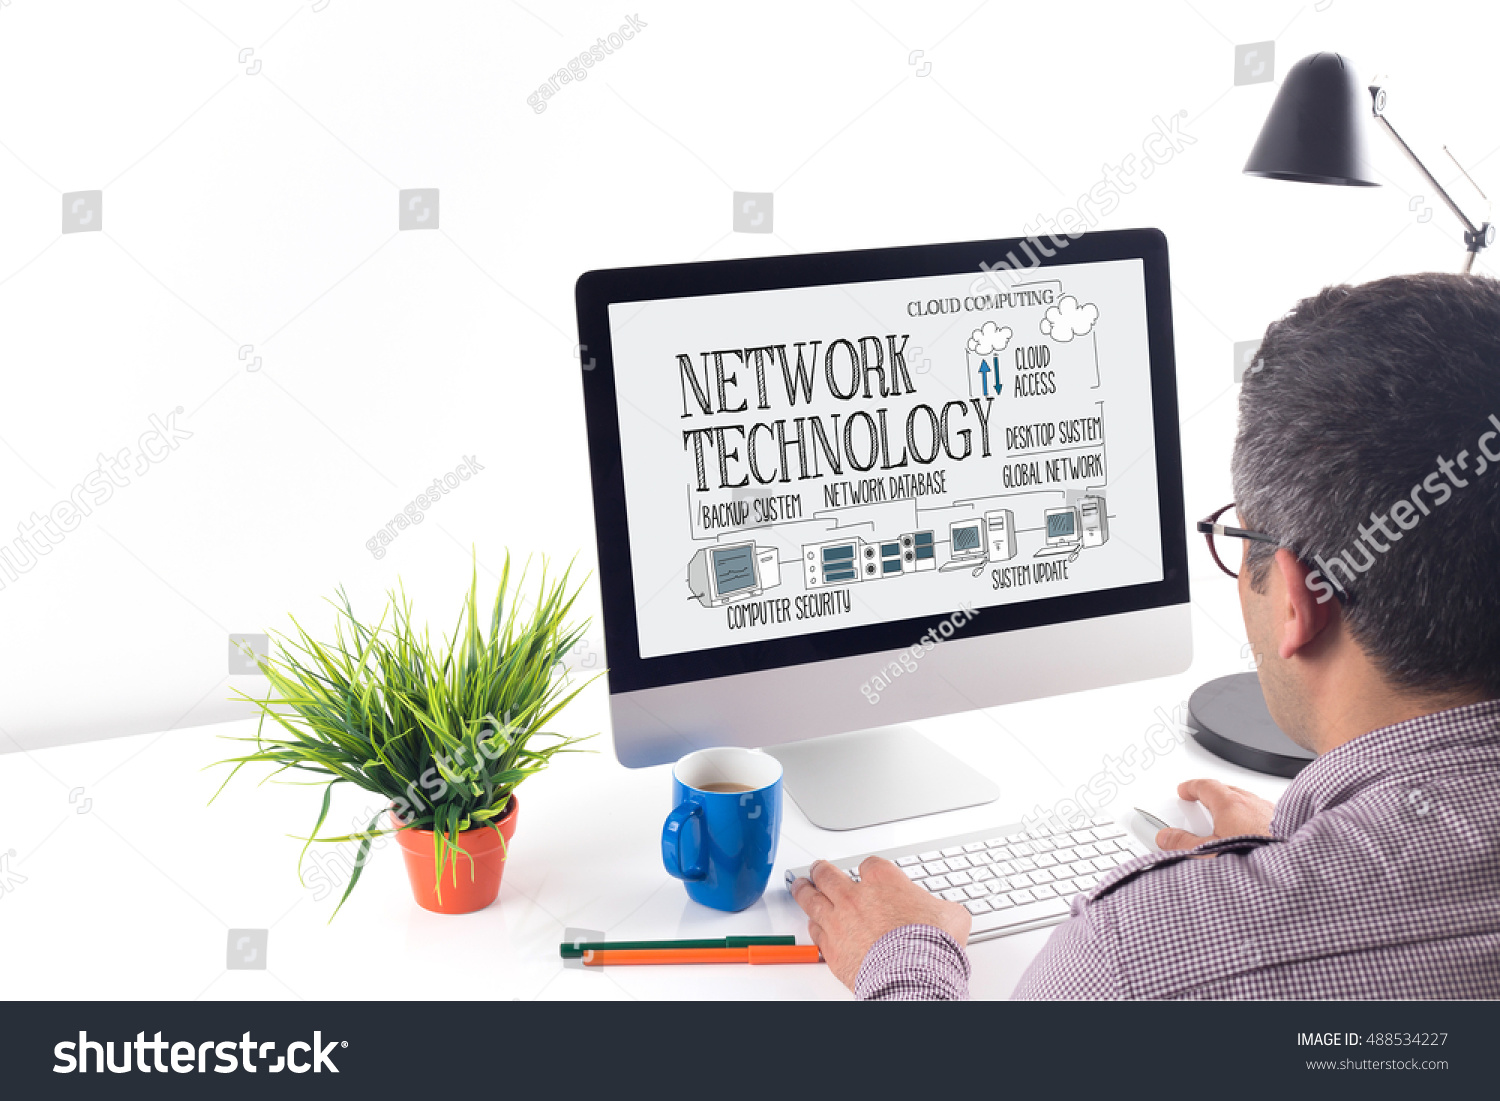 COMPUTER COMMUNICATION DATA AND NETWORK TECHNOLOGY CONCEPT #488534227